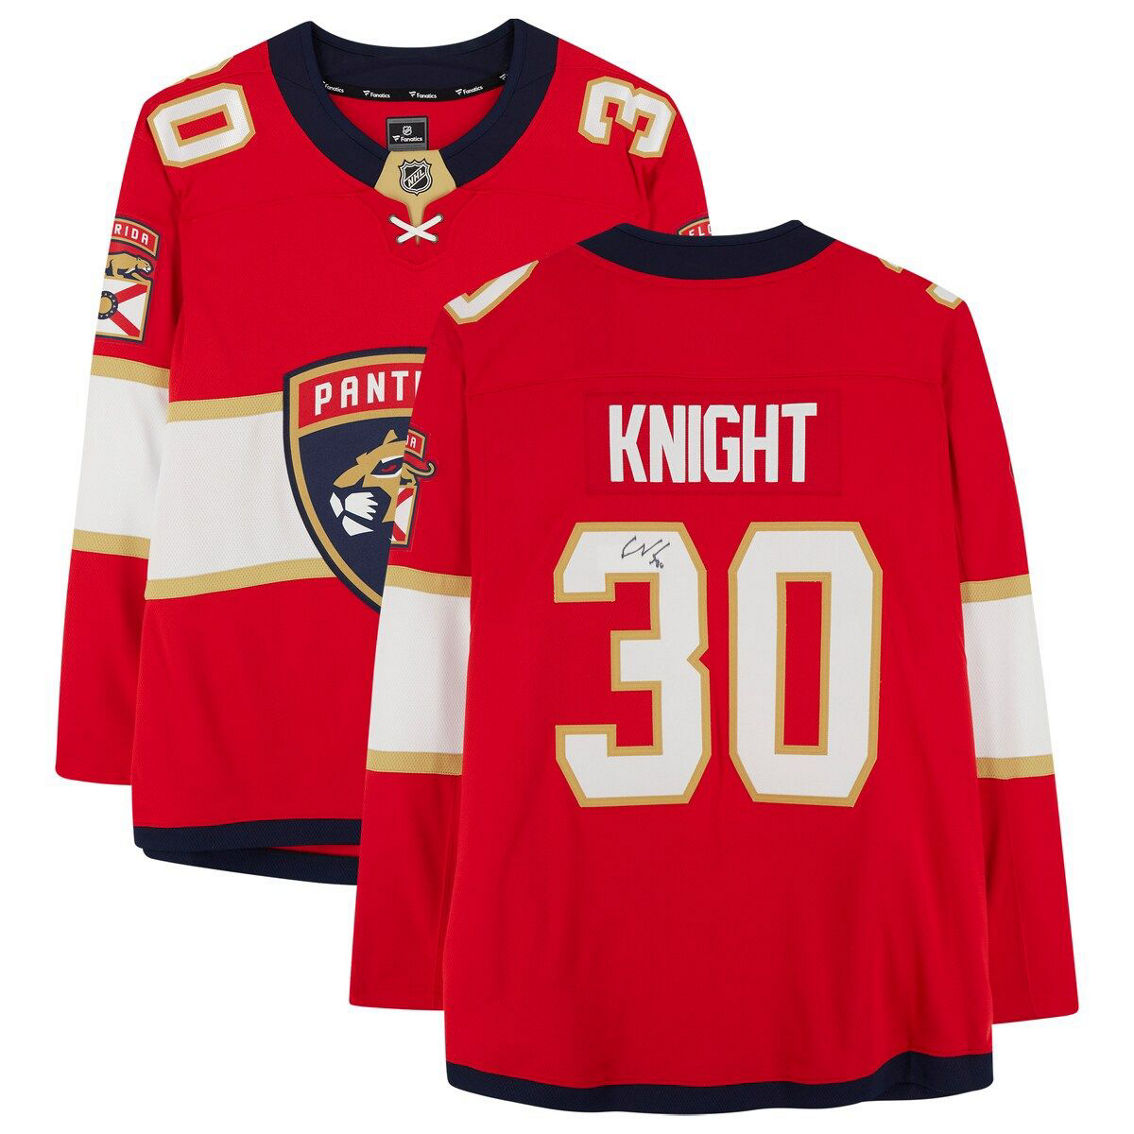 Fanatics Authentic Spencer Knight Red Florida Panthers Autographed Fanatics Breakaway Jersey - Image 2 of 4